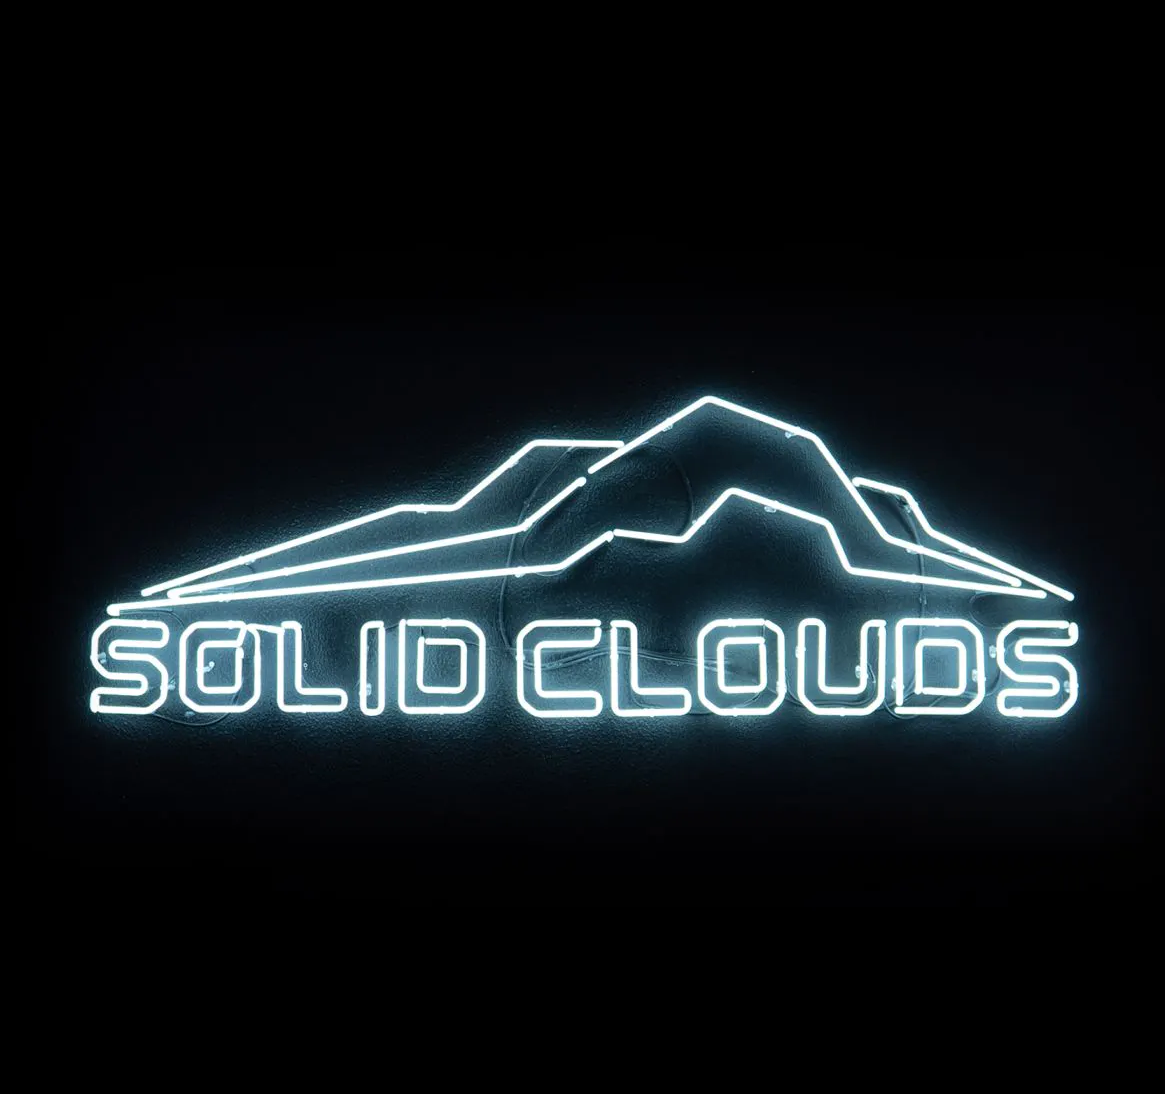 Solid Clouds raises $5.8 million in an oversubscribed share offering